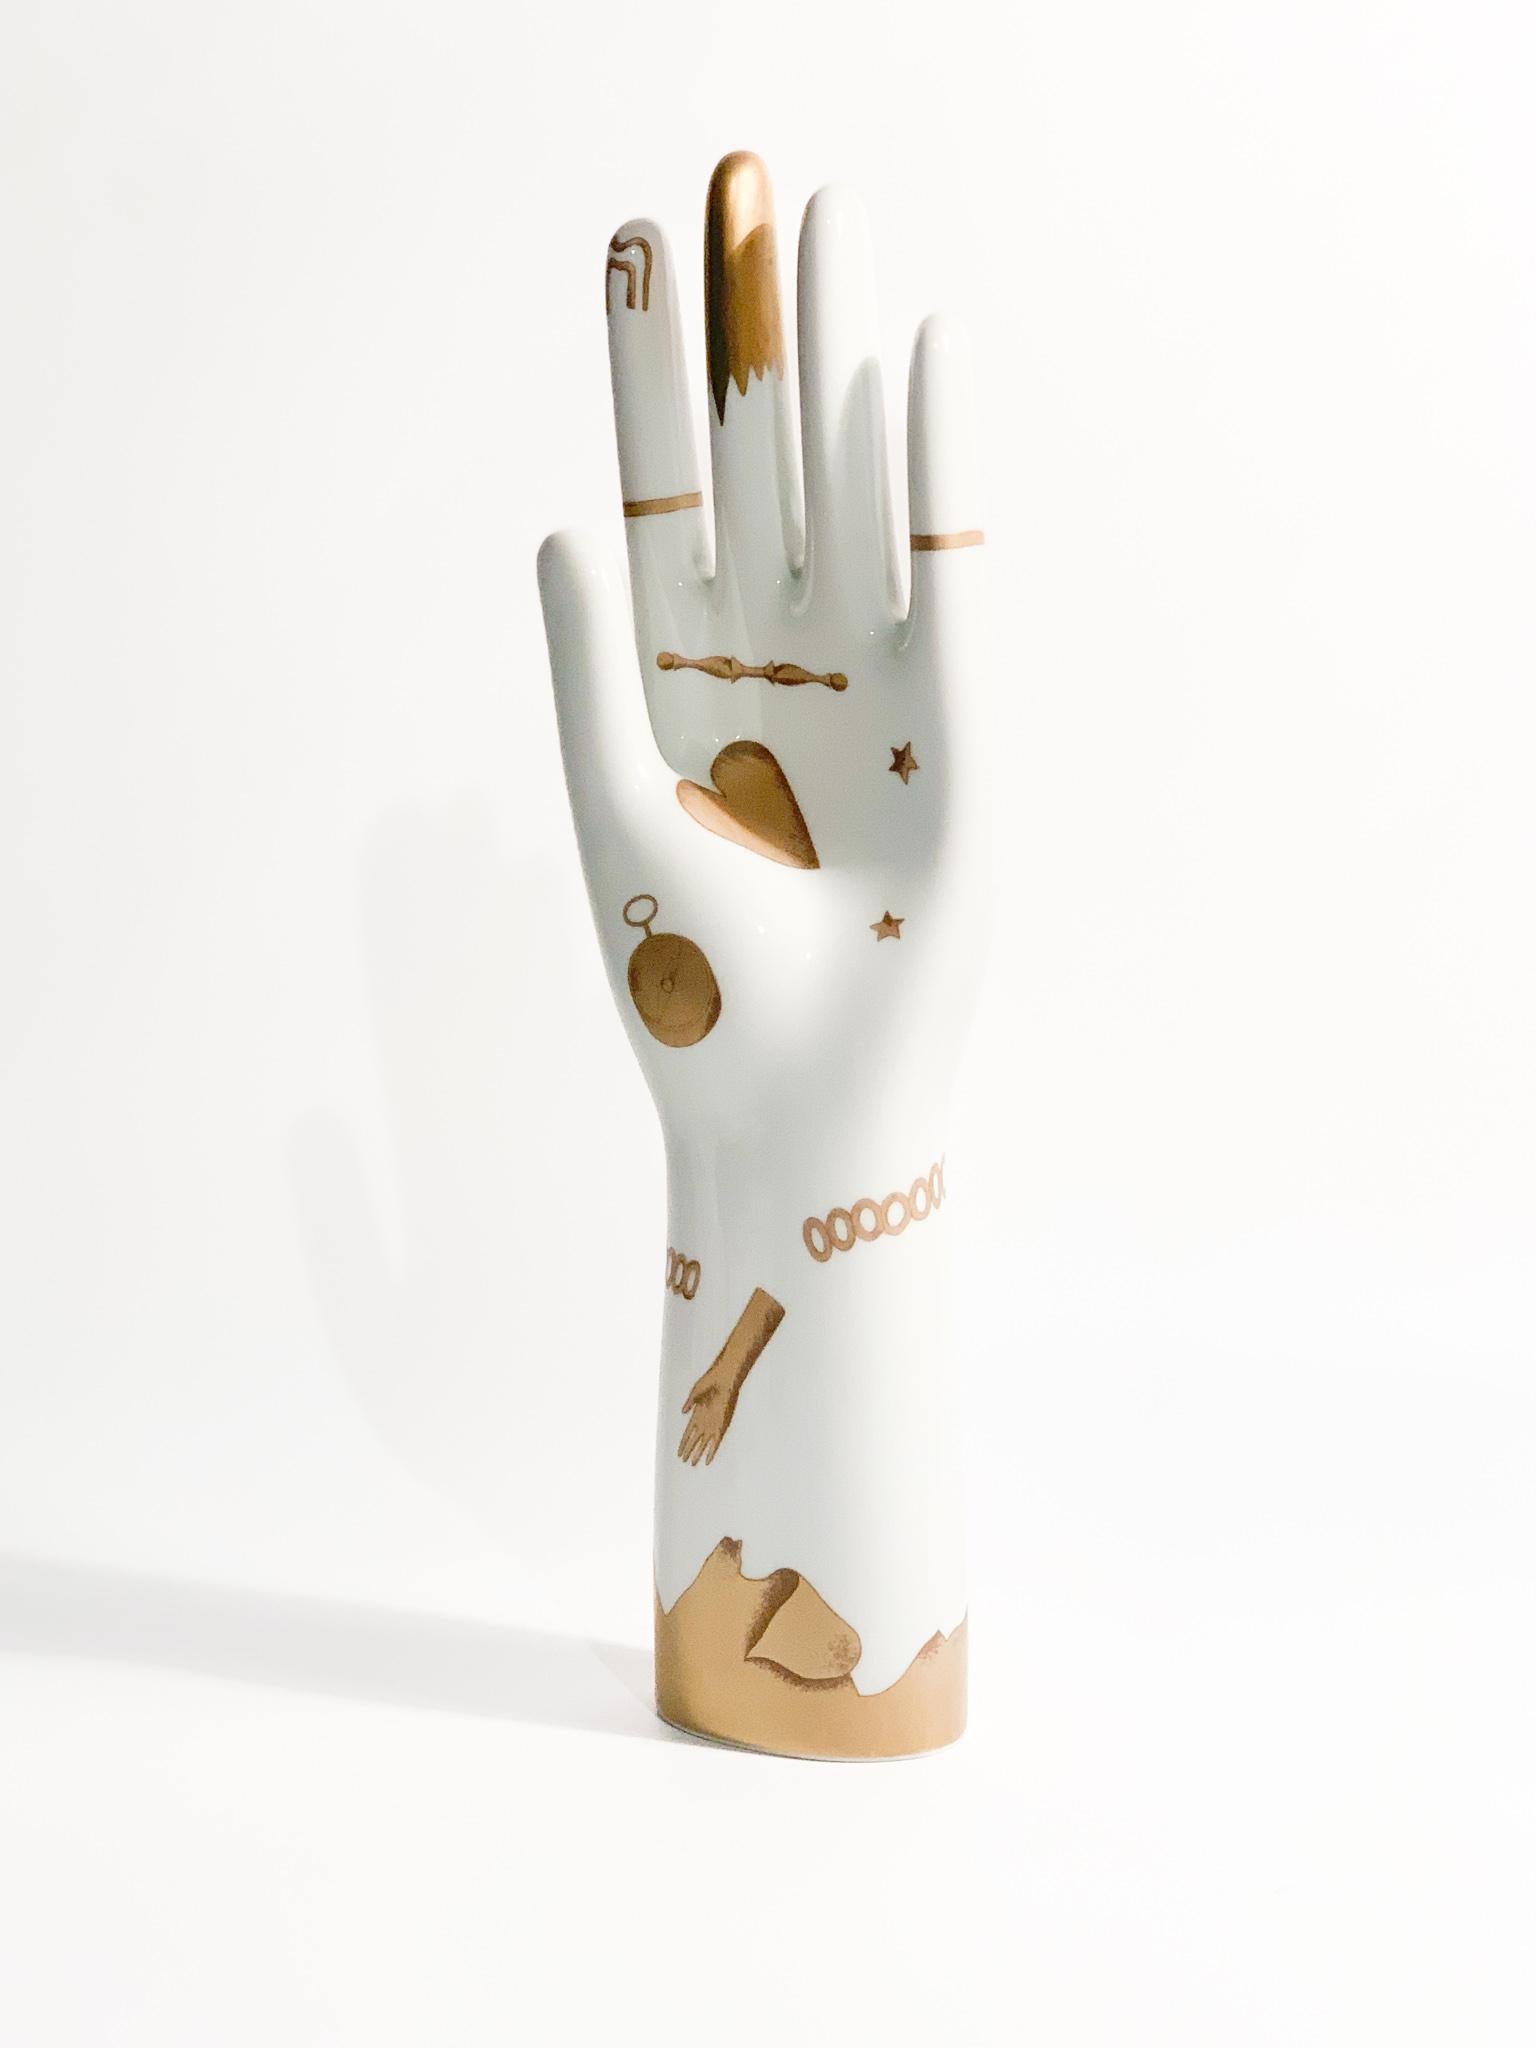 Porcelain re-edition by Richard Ginori of the hand from the Trionfo Italiano collection created by Gio Ponti in 1927

Ø cm 7 Ø cm 4 h cm 30

Company of Lombard origin founded in 1896 when the Marquis Carlo Ginori, passionate about white gold,